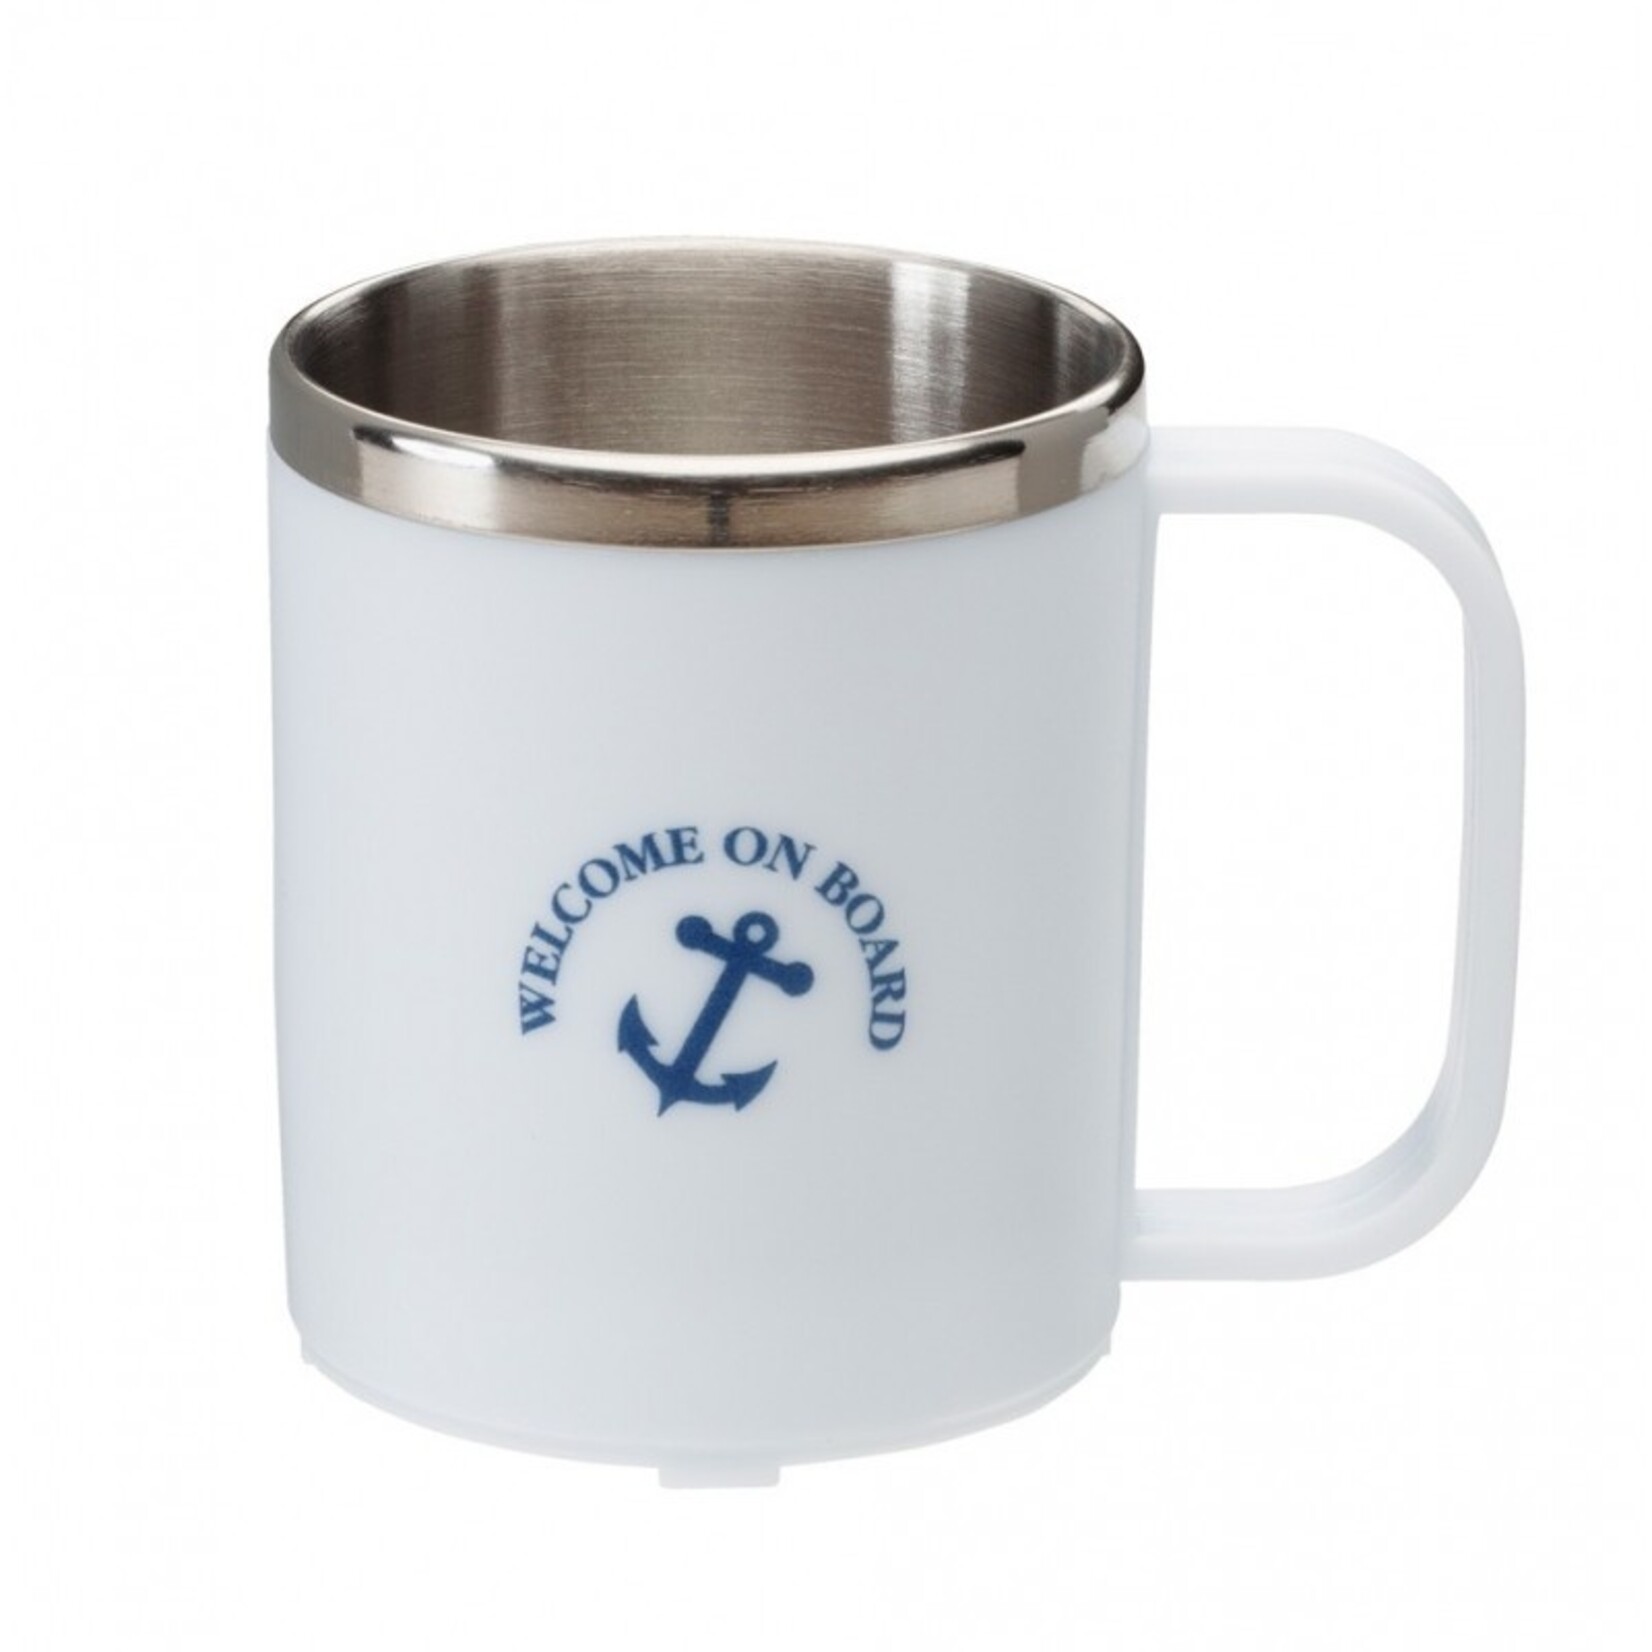 Coffee cup with stainless steel inside white